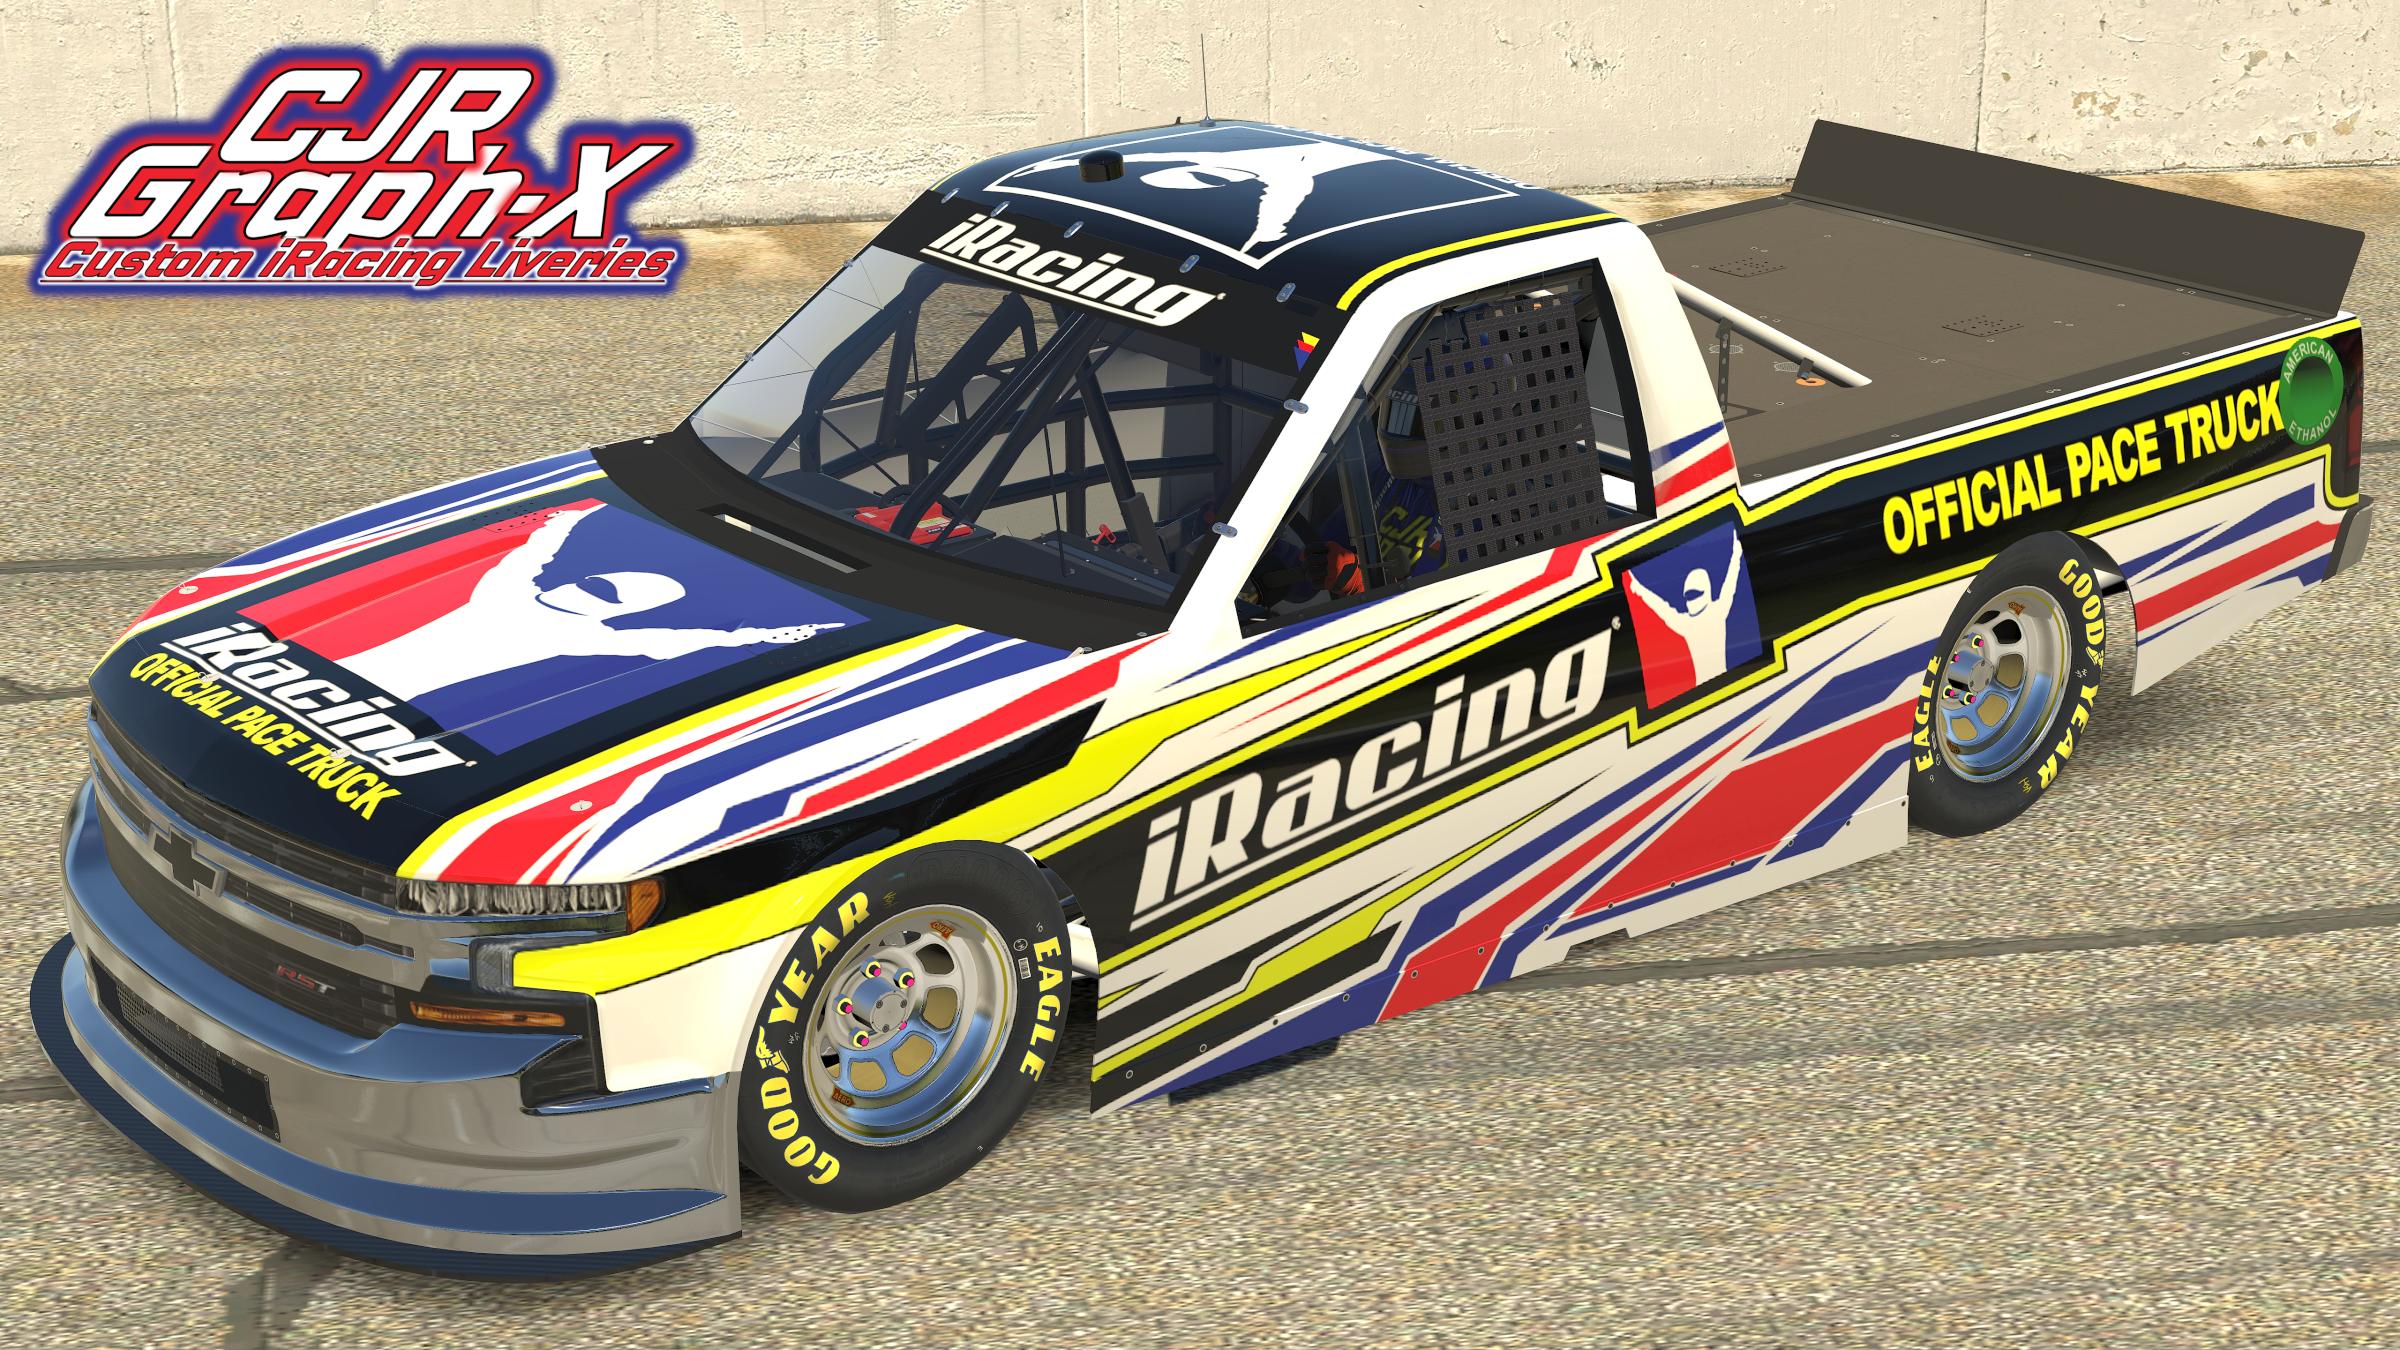 Preview of iRacing Pace Truck by Corey Rutherford